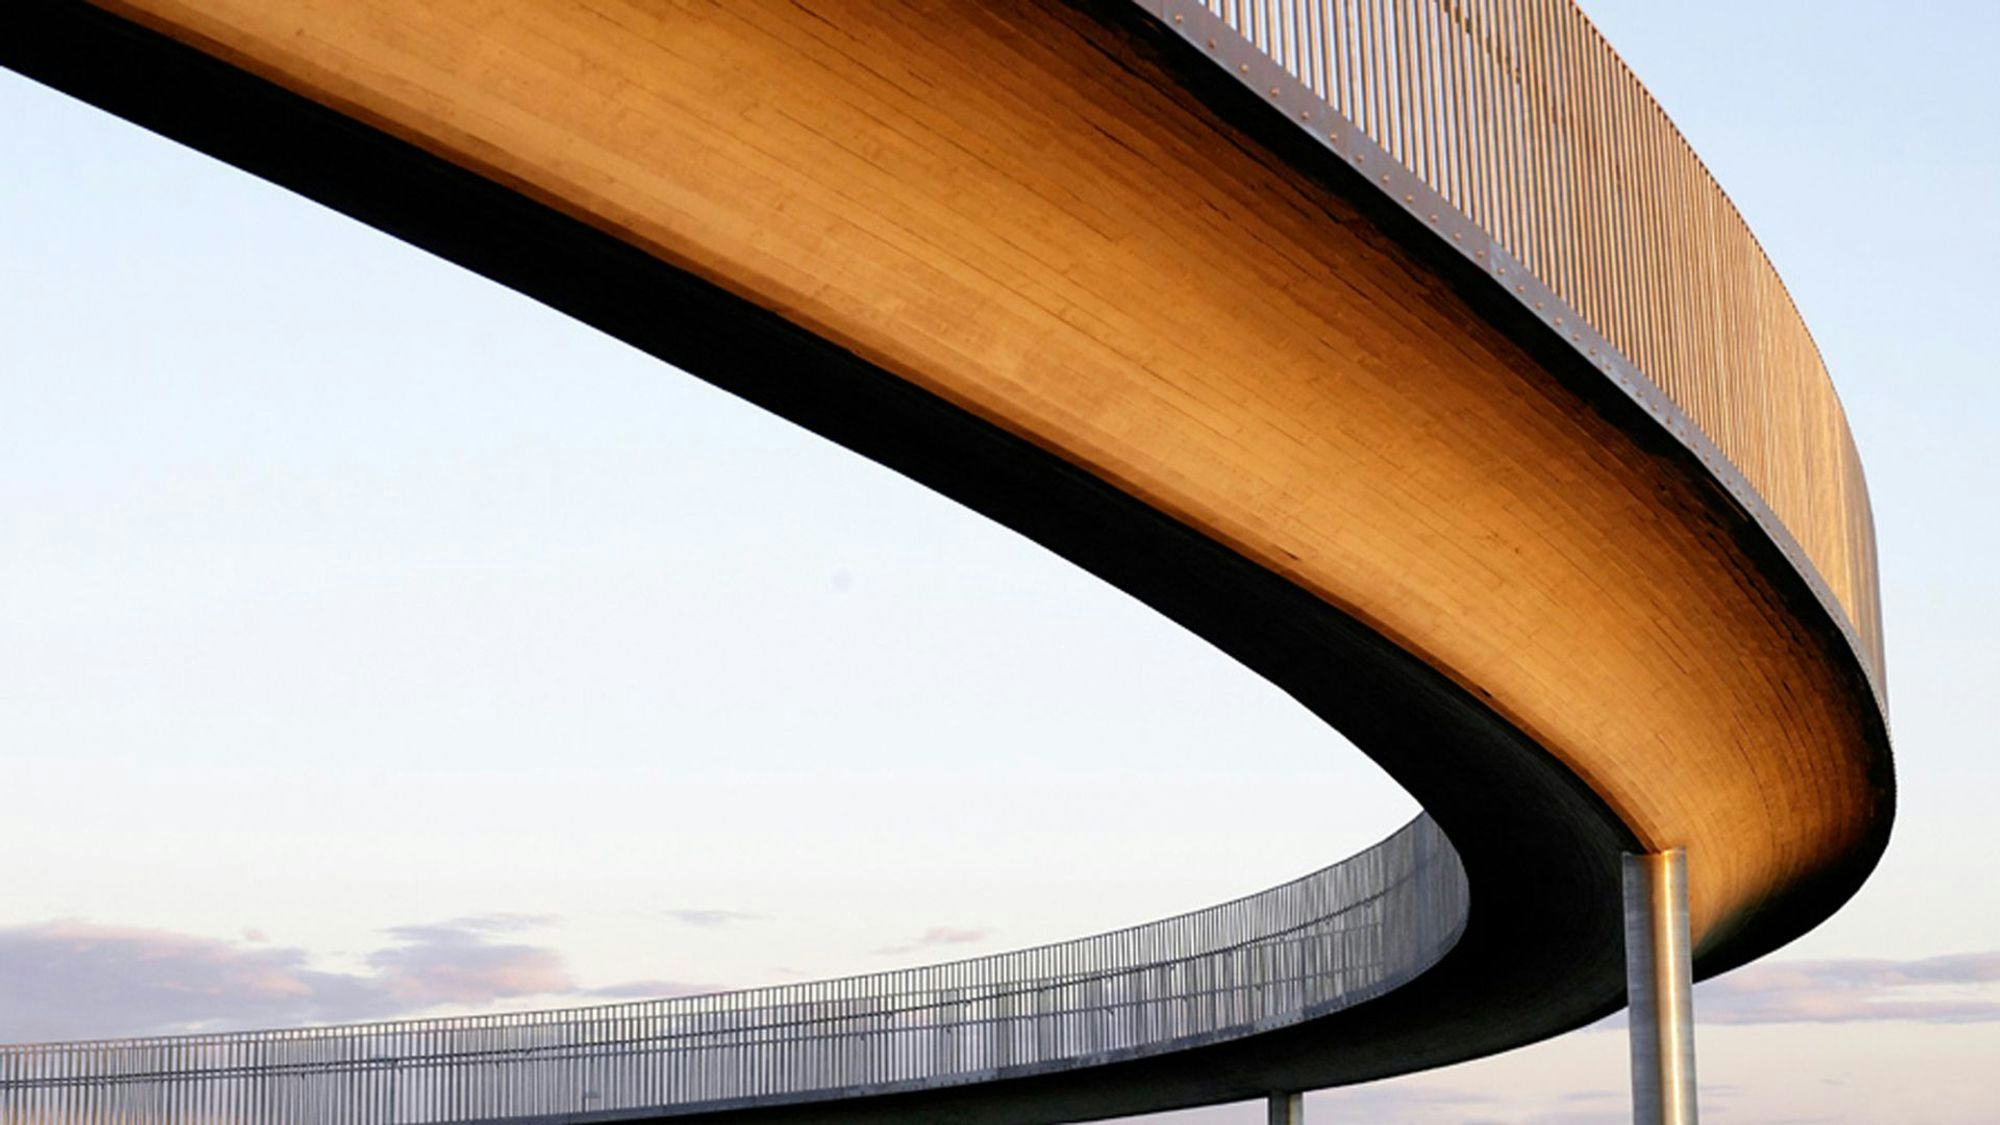 The photo shows a close-up of a curved bridge with a sleek design against a clear sky